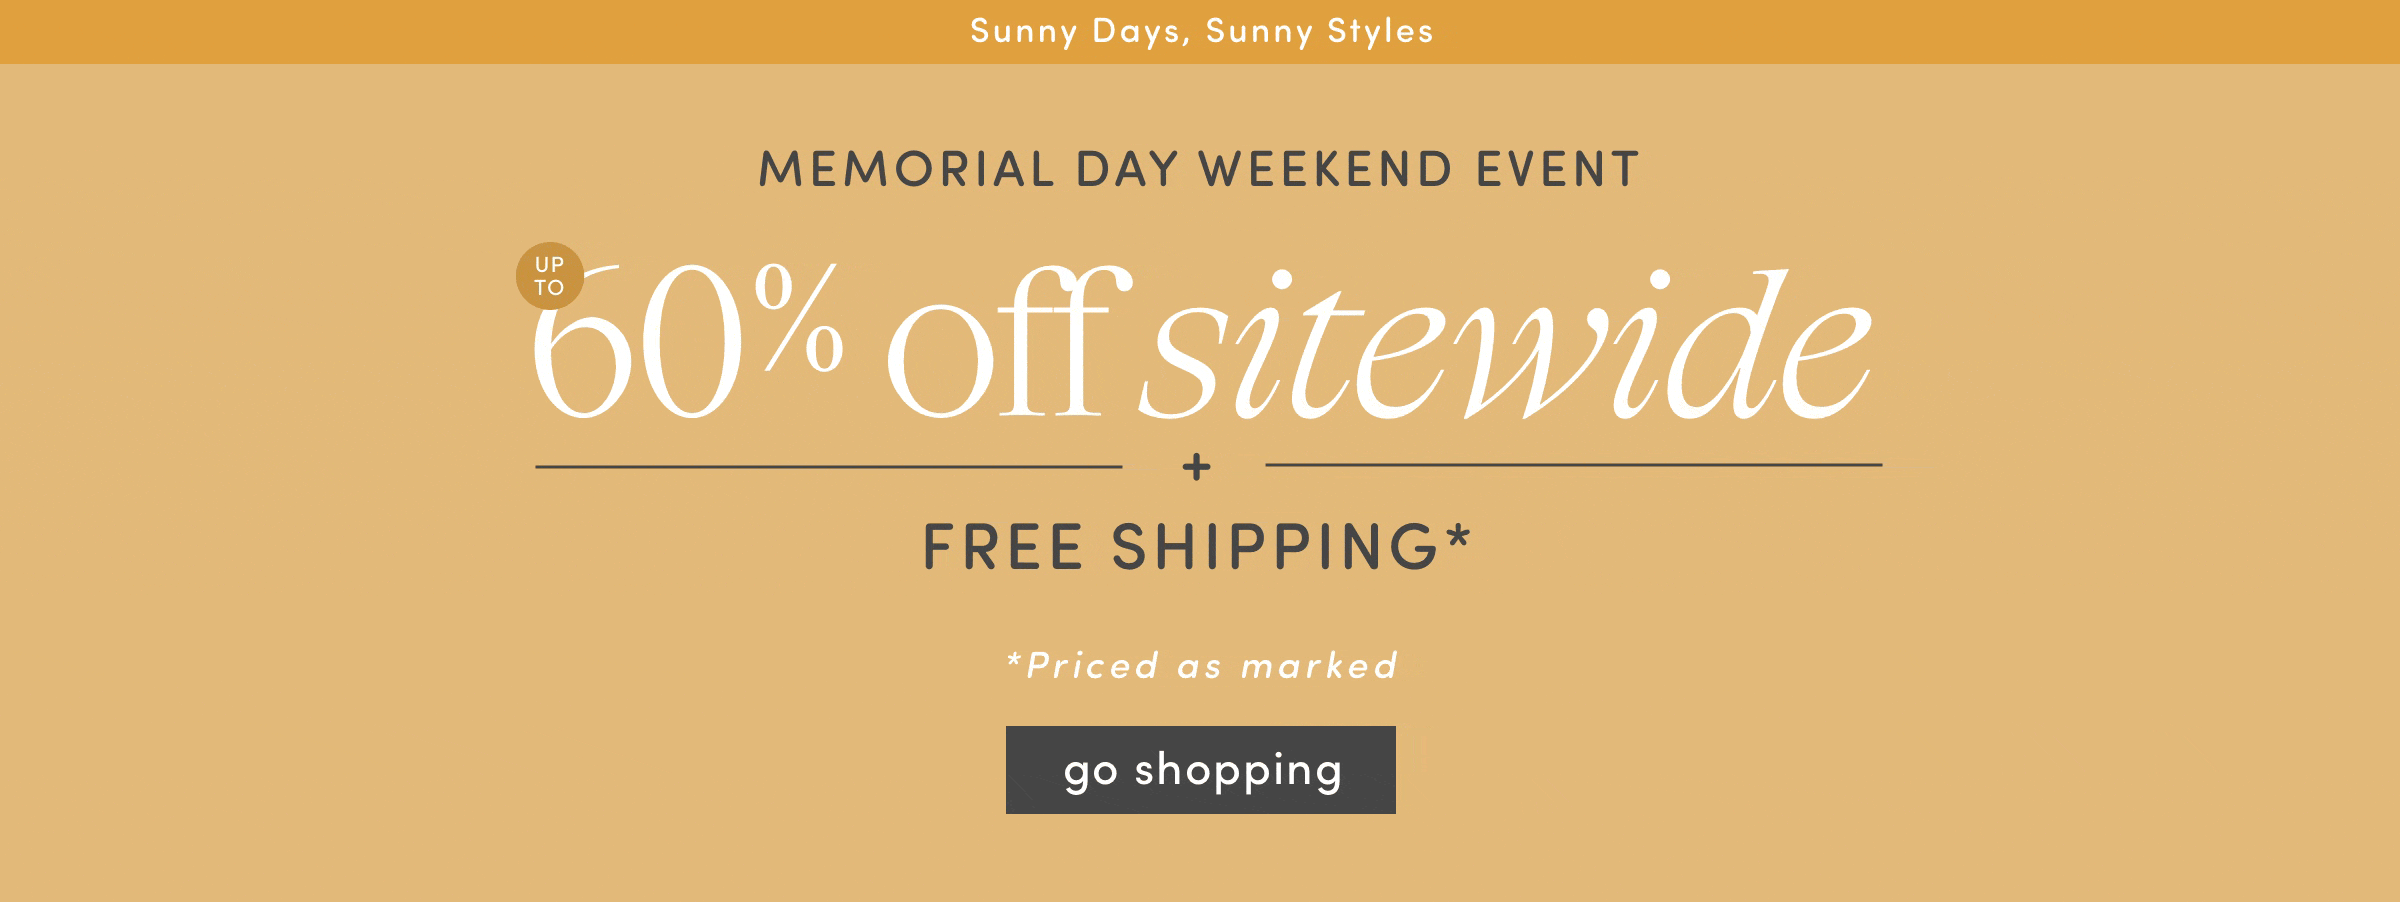 20% off stiewide + free shipping. shop now